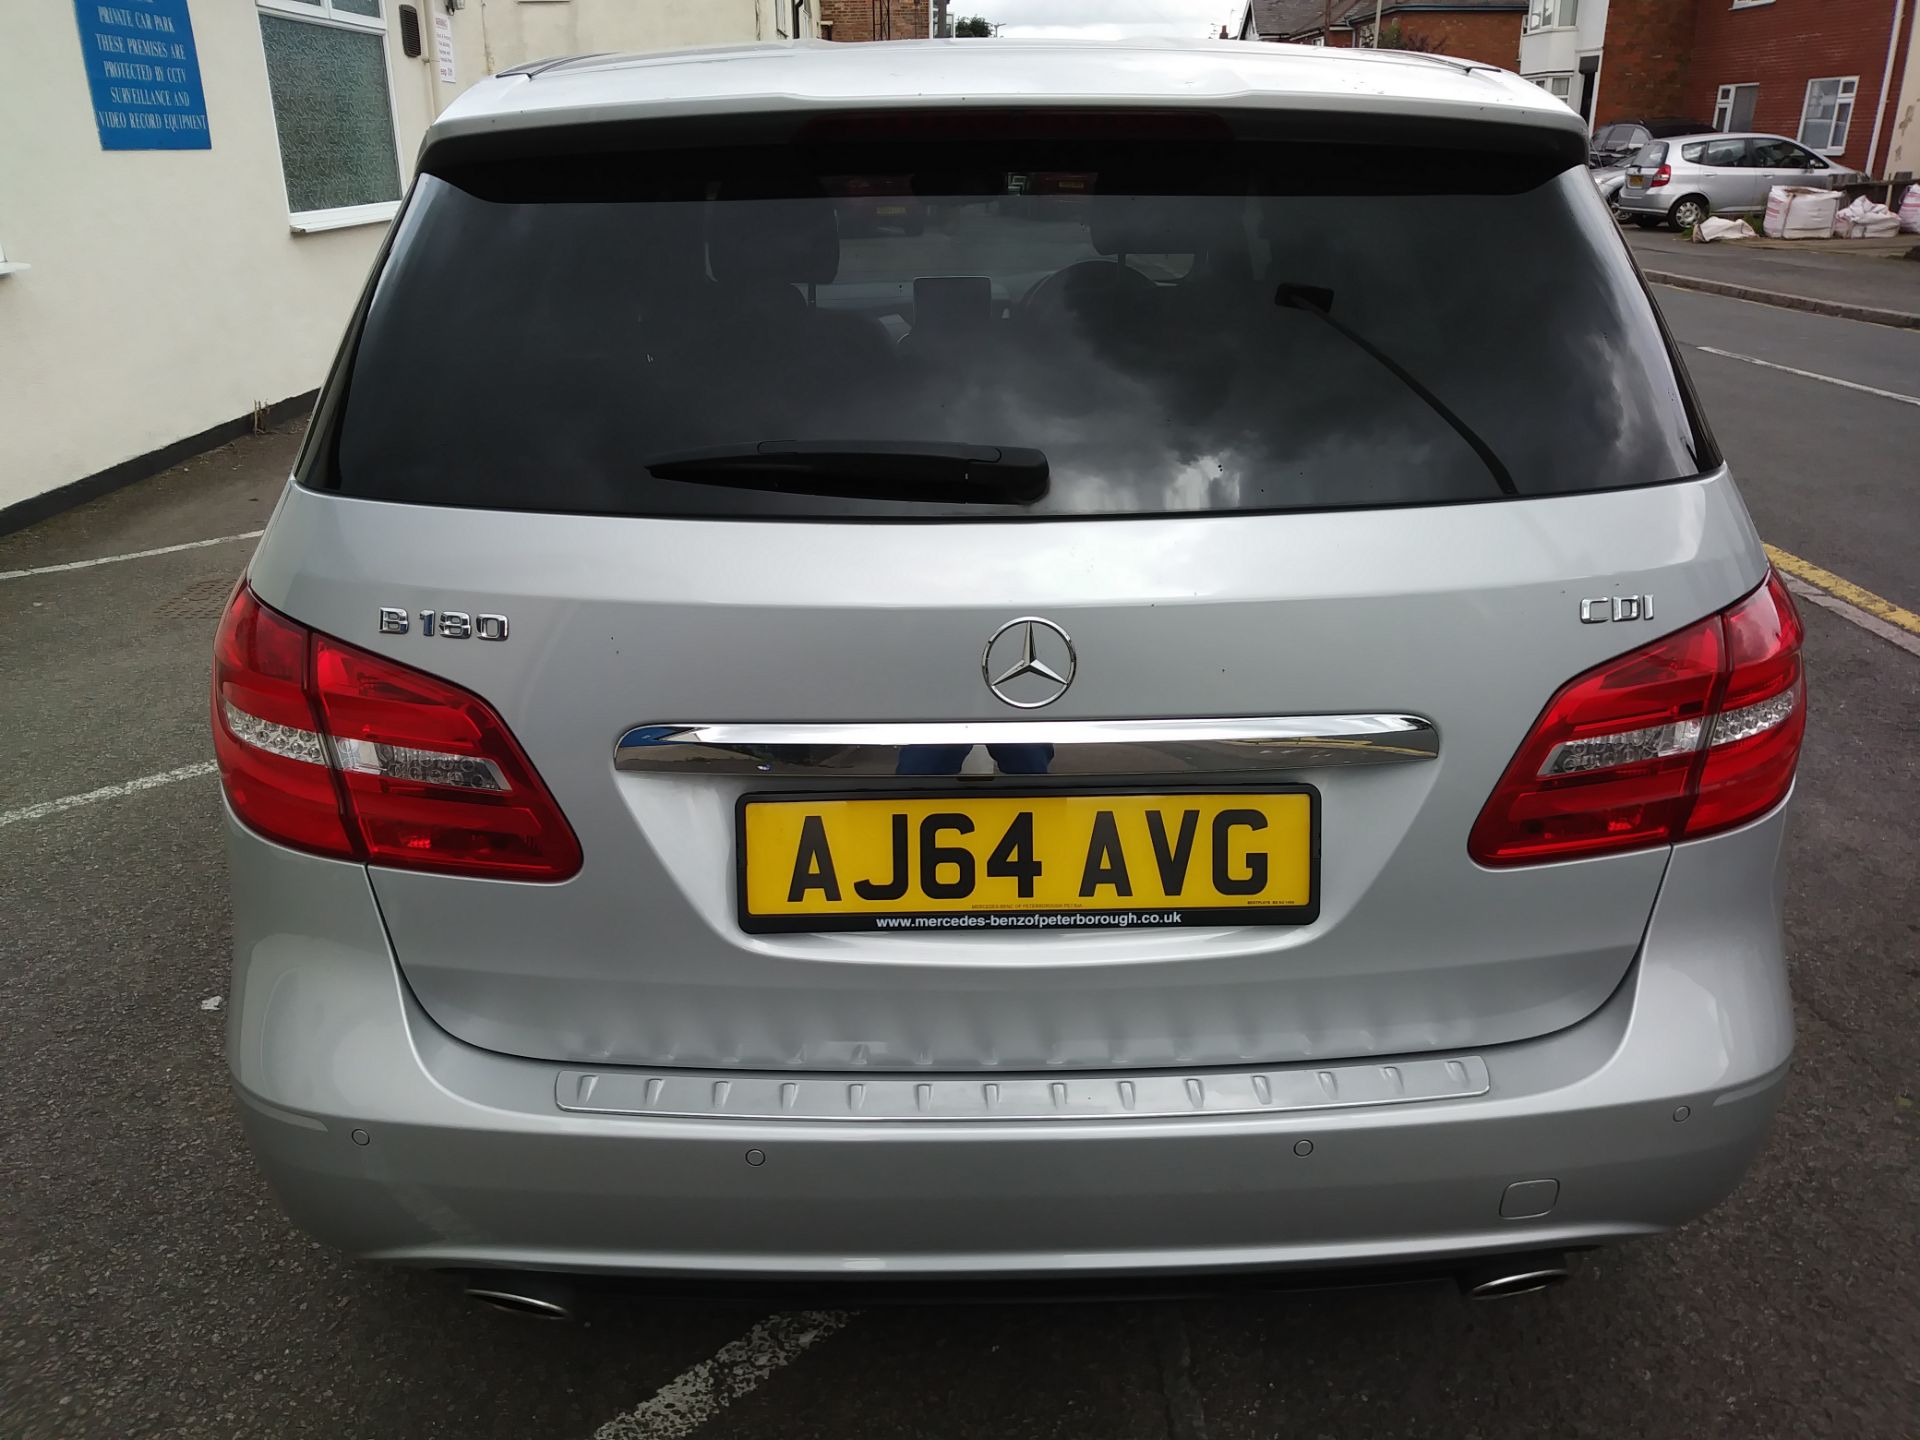 Mercedes B Class 1.5 B180 CDI Sport 7G-DCT 5dr - Automatic, Diesel, 103000 Miles - Image 13 of 39